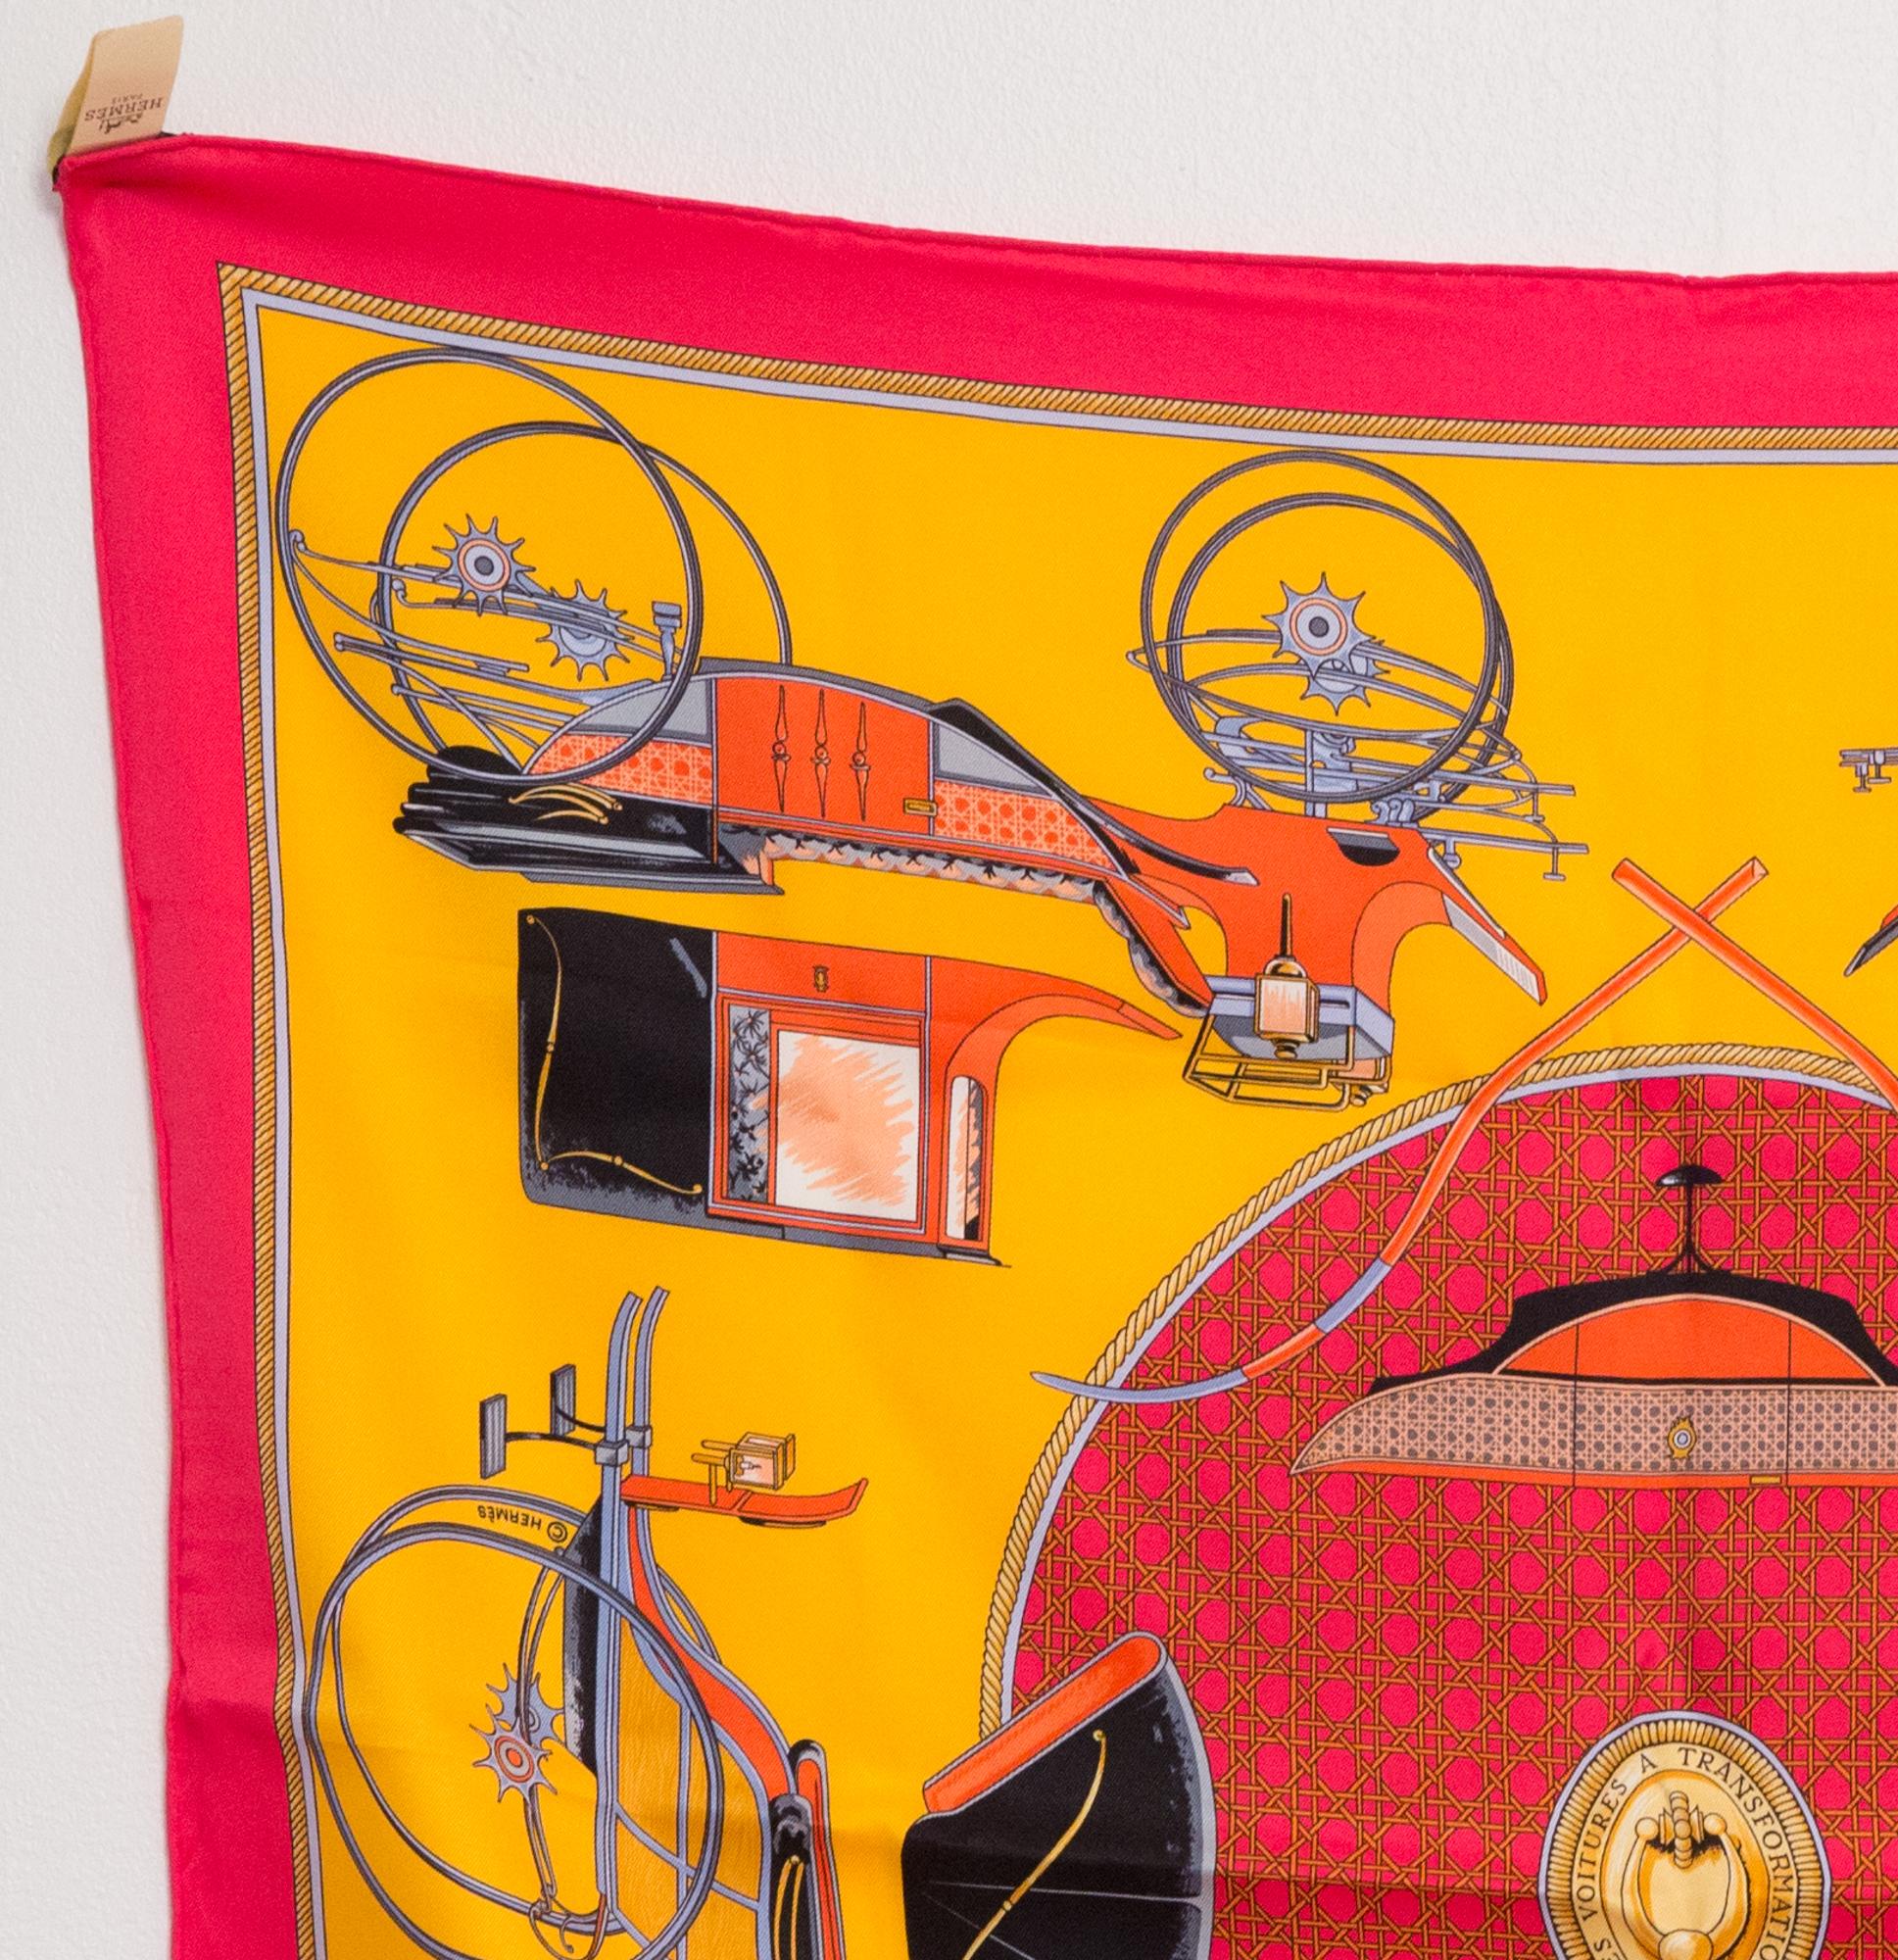 Hermes silk scarf  Les voitures a transformation by Francoise de La Perriere featuring a pink and yellow ground, and a Hermès signature. 
First edition 1965.
In excellent vintage condition.  (as never worn) Made in France.
275 in. (70cm) X 275 in.